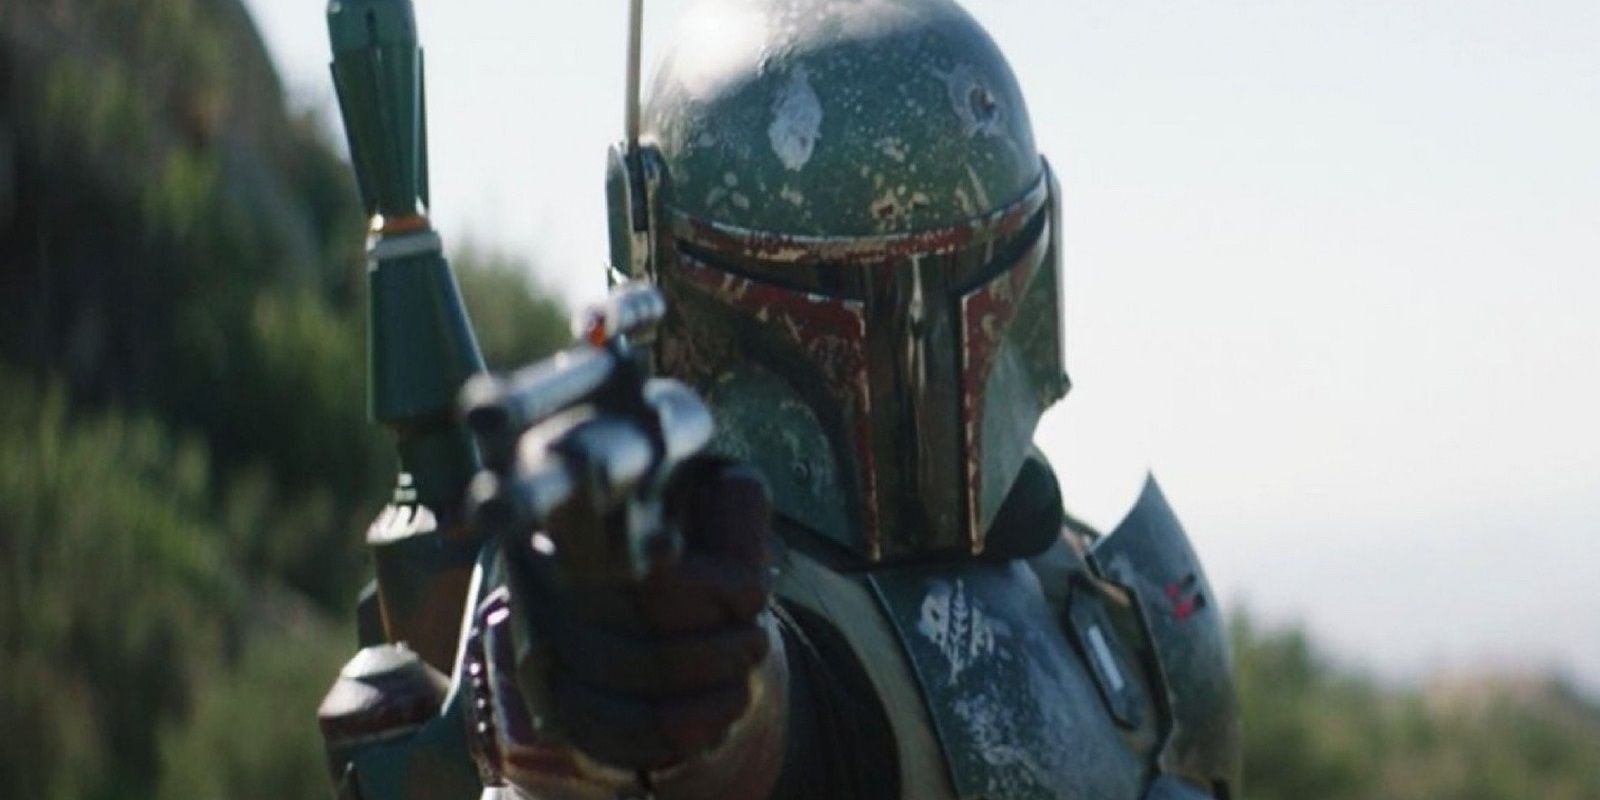 Boba_Fett_with_a_blaster_in_The_Mandalorian